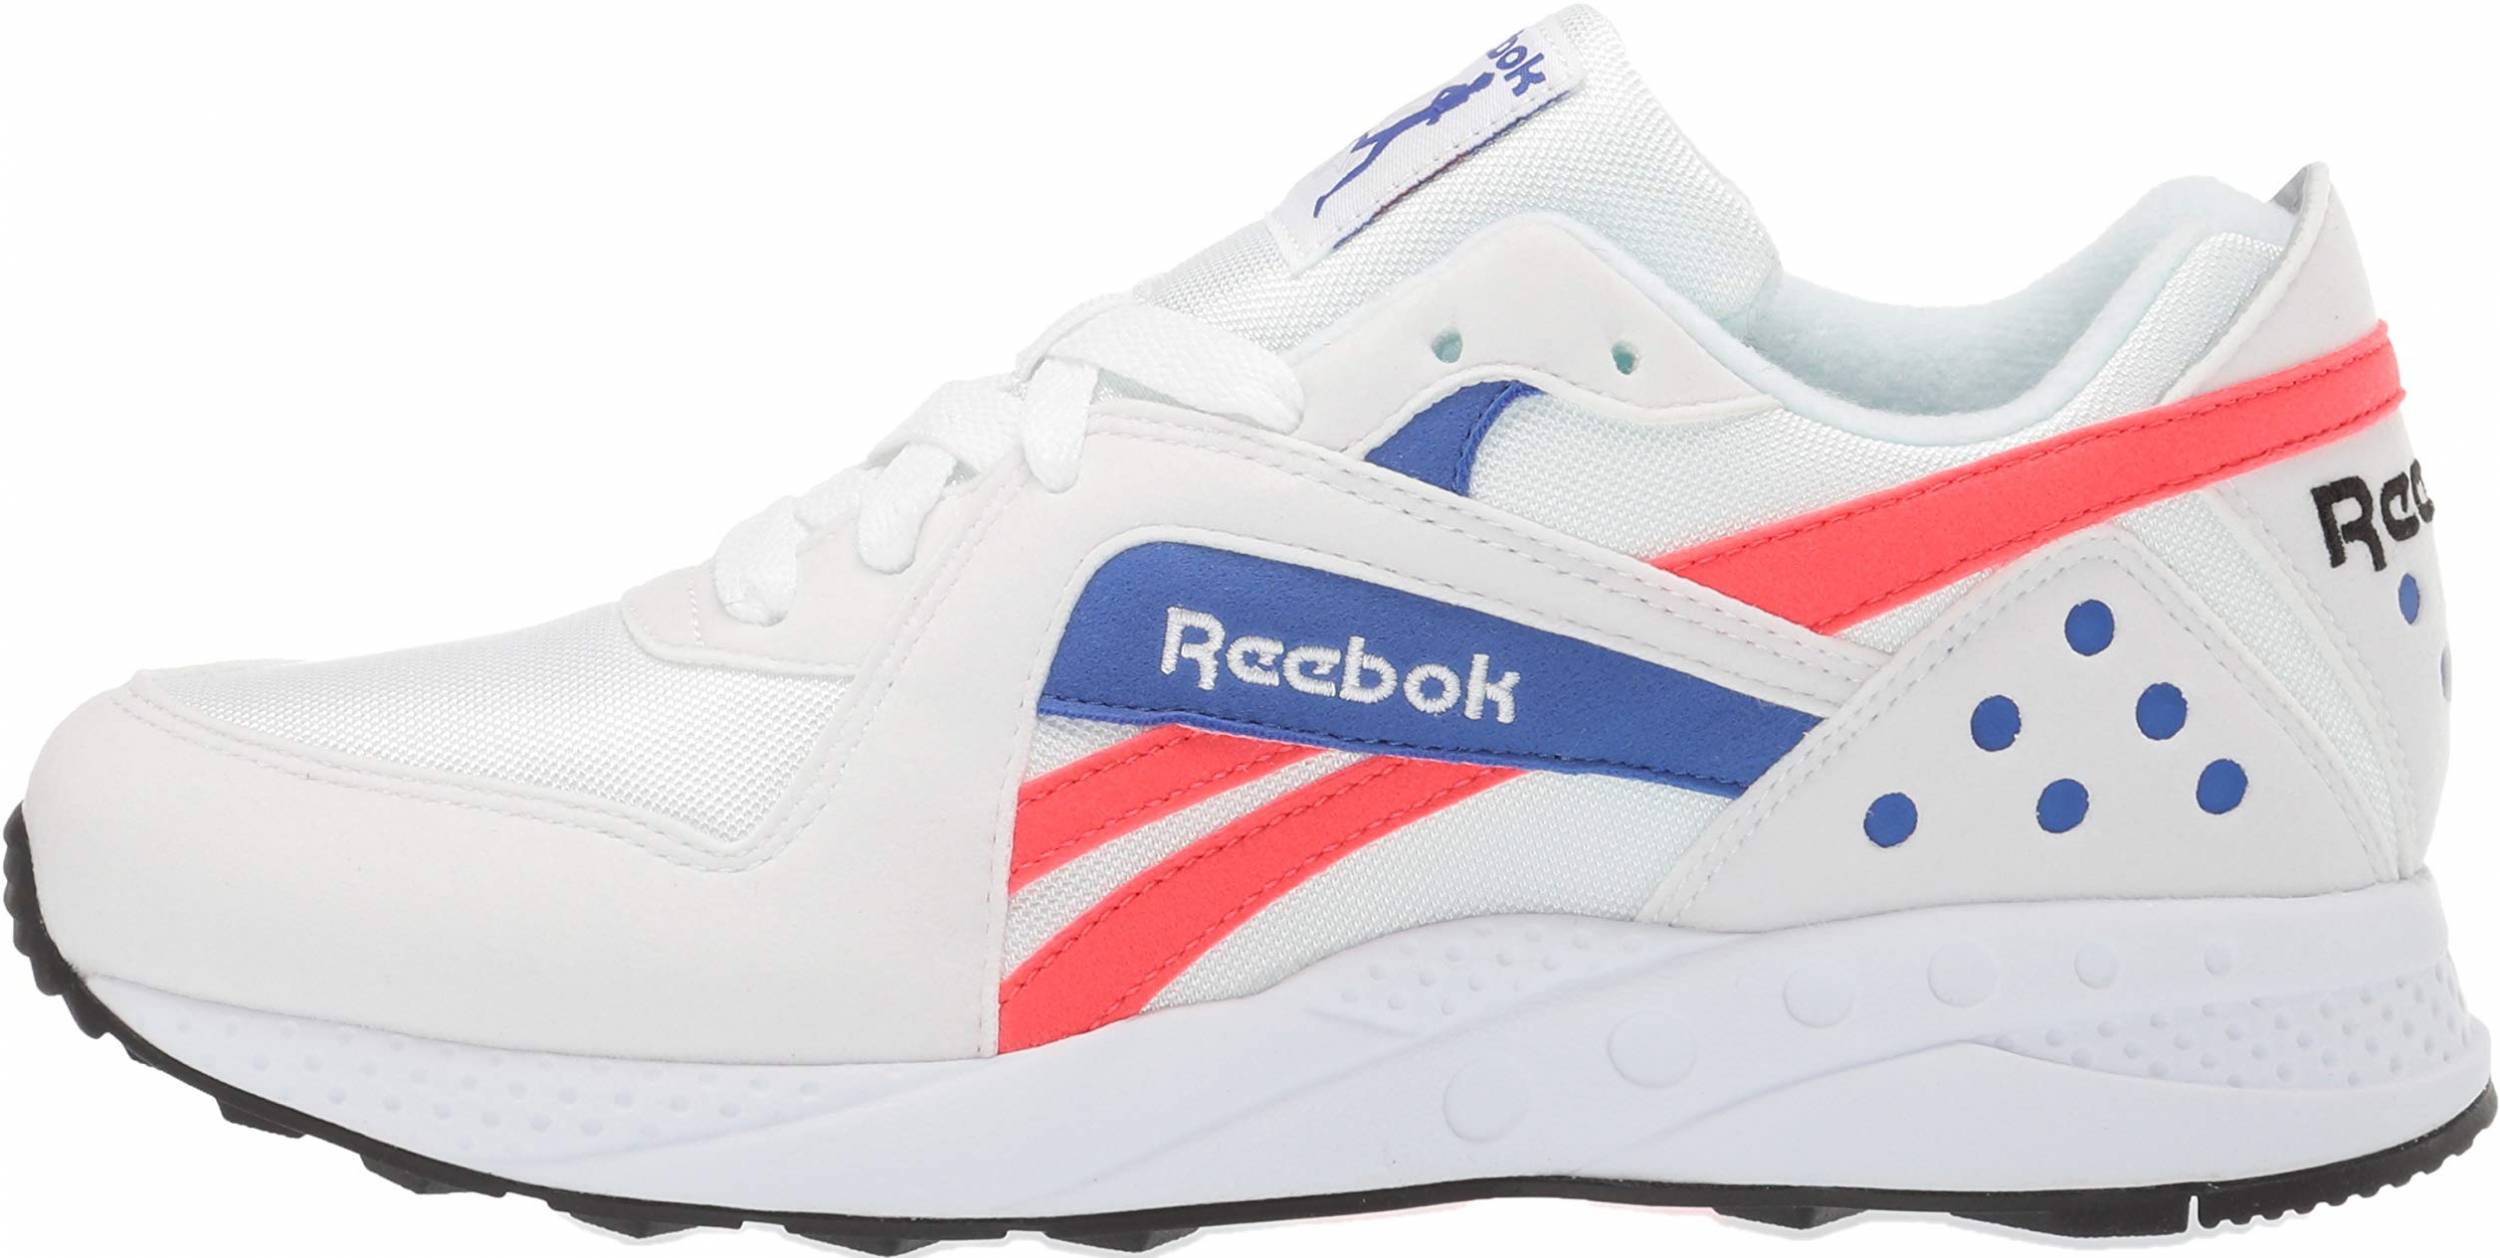 Only $31 + Review of Reebok Pyro 